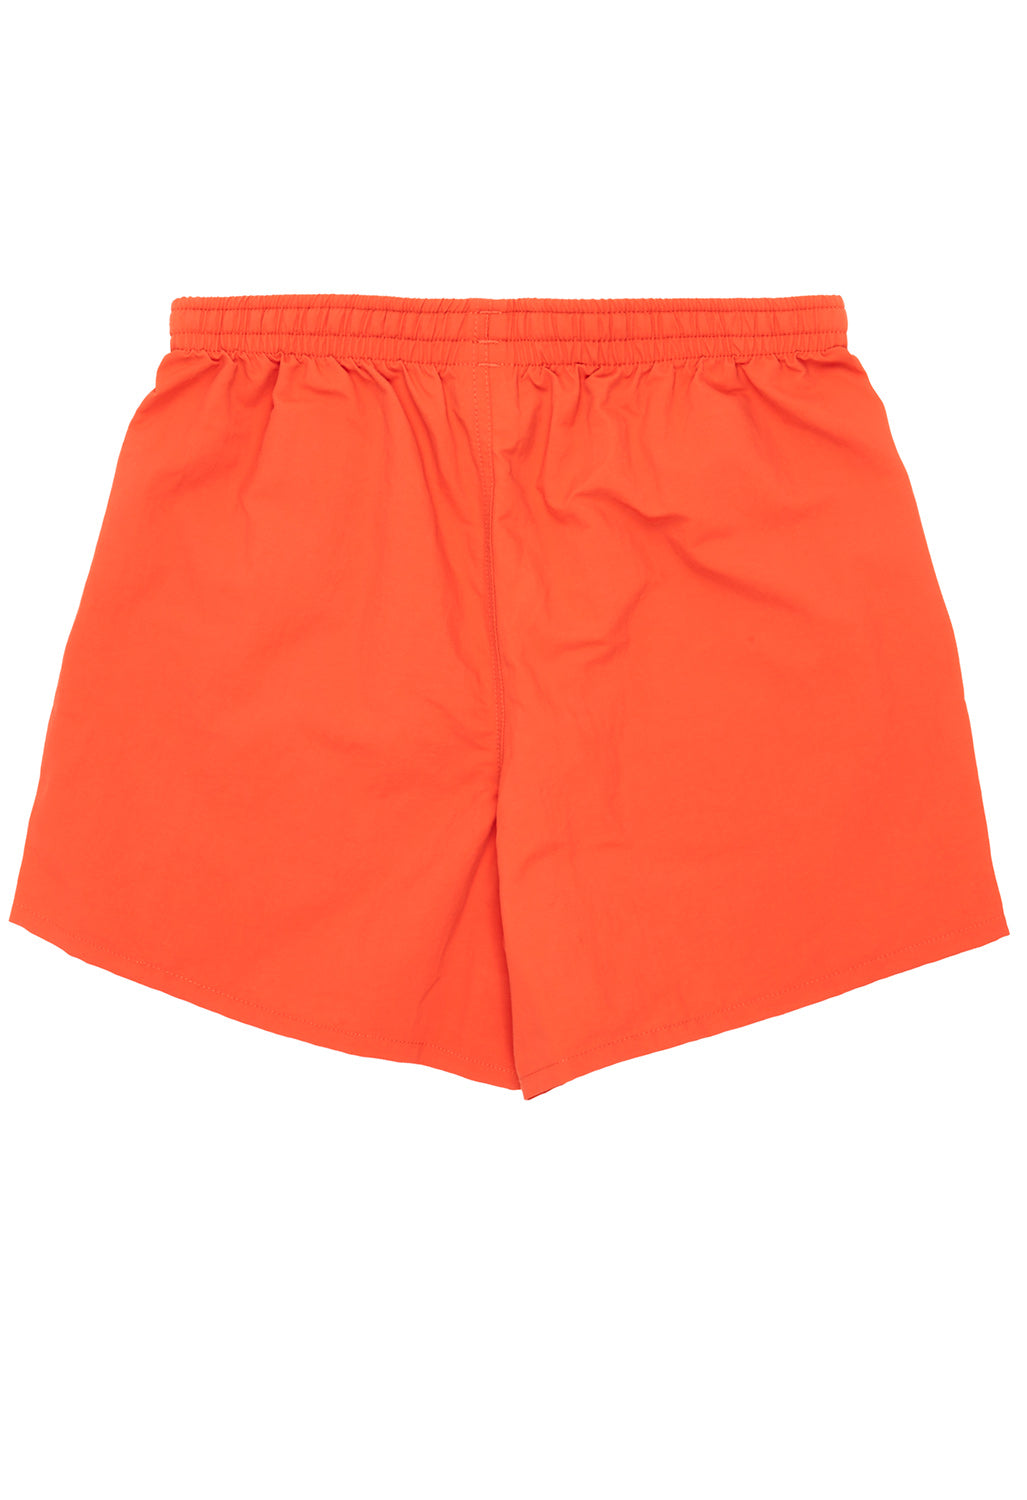 Patagonia Women's Baggies Shorts - 5 in. - Pimento Red